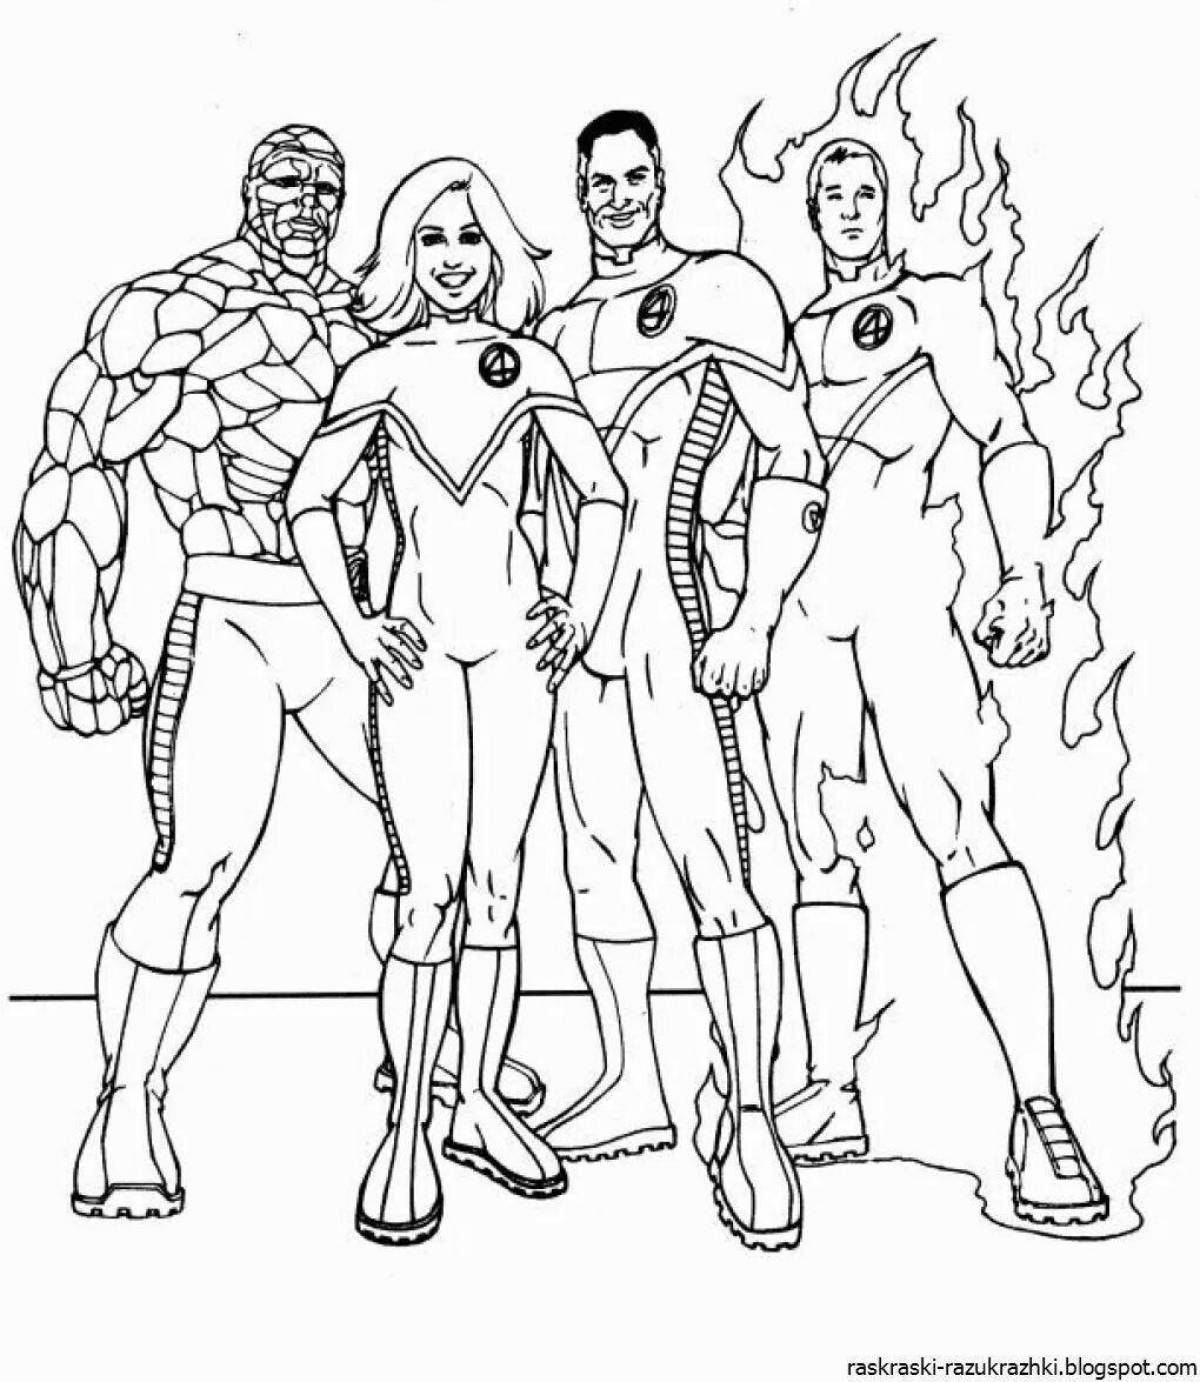 Fun superhero coloring pages for kids 5-6 years old